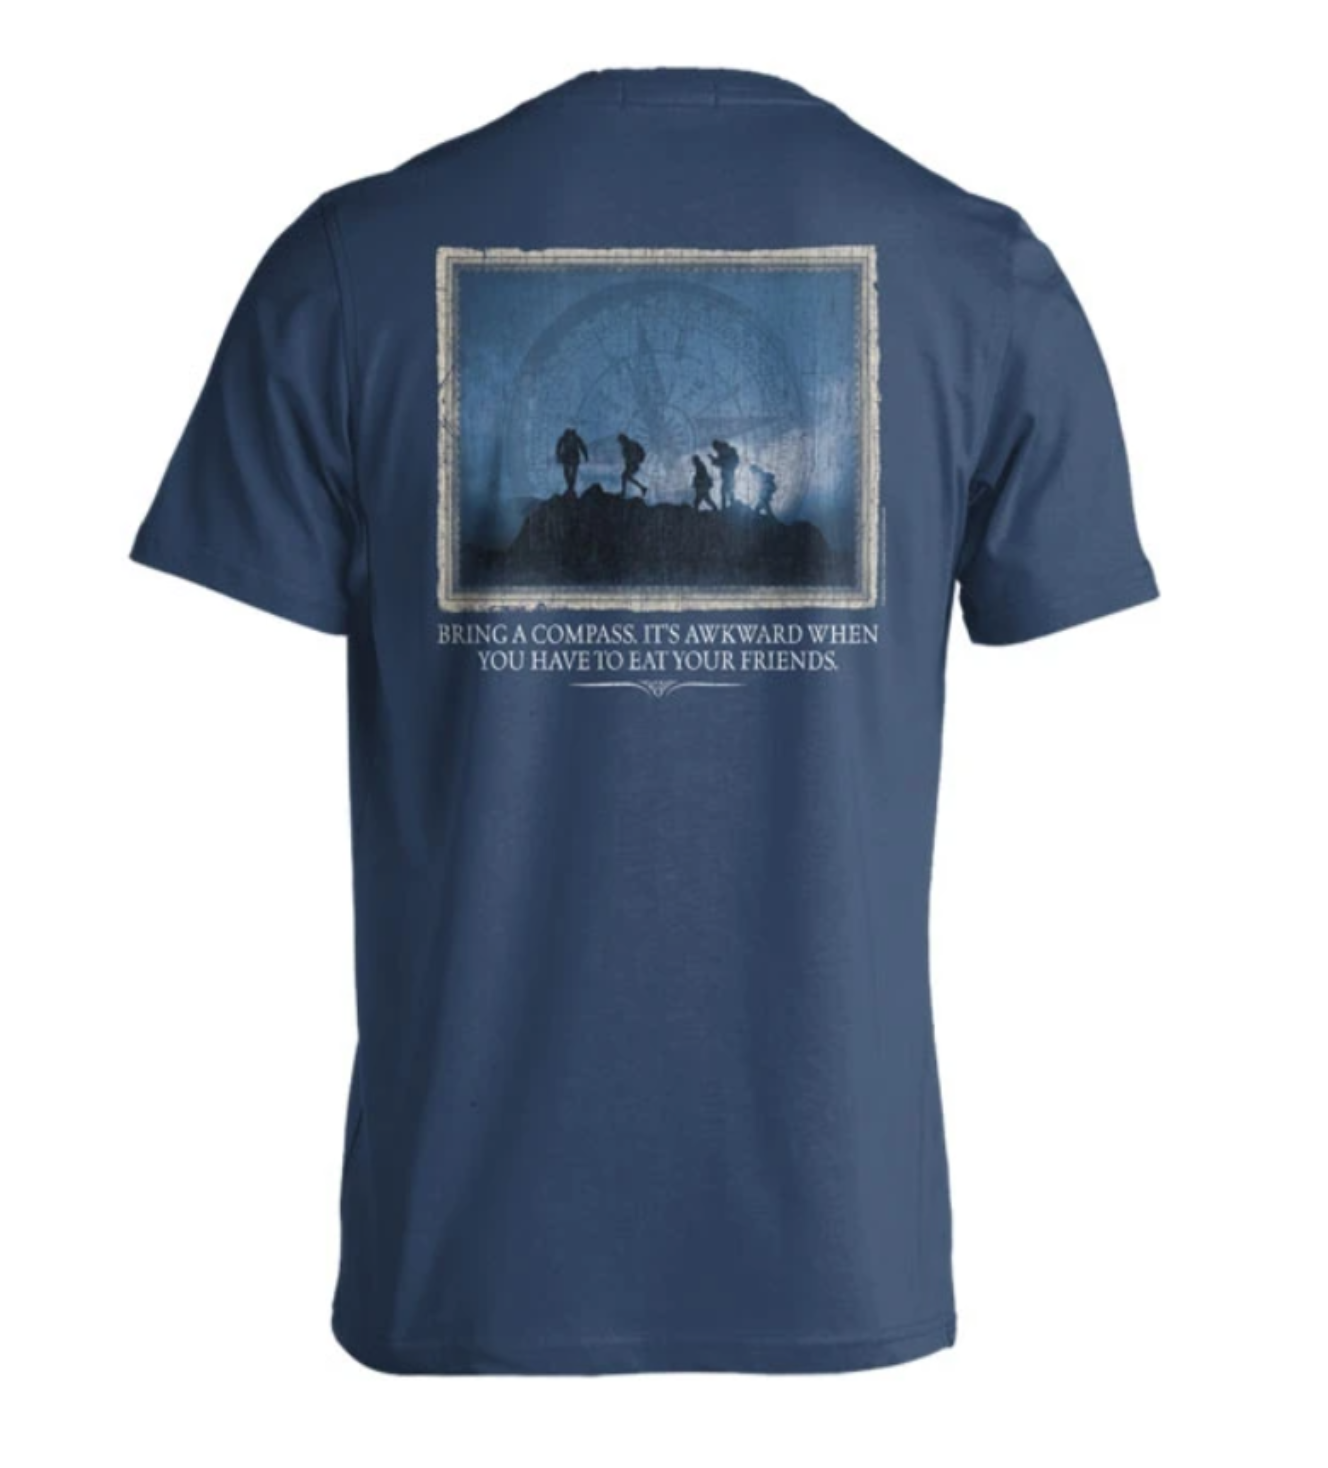 Awkward Compass - Short Sleeve T-Shirt by Off The Map